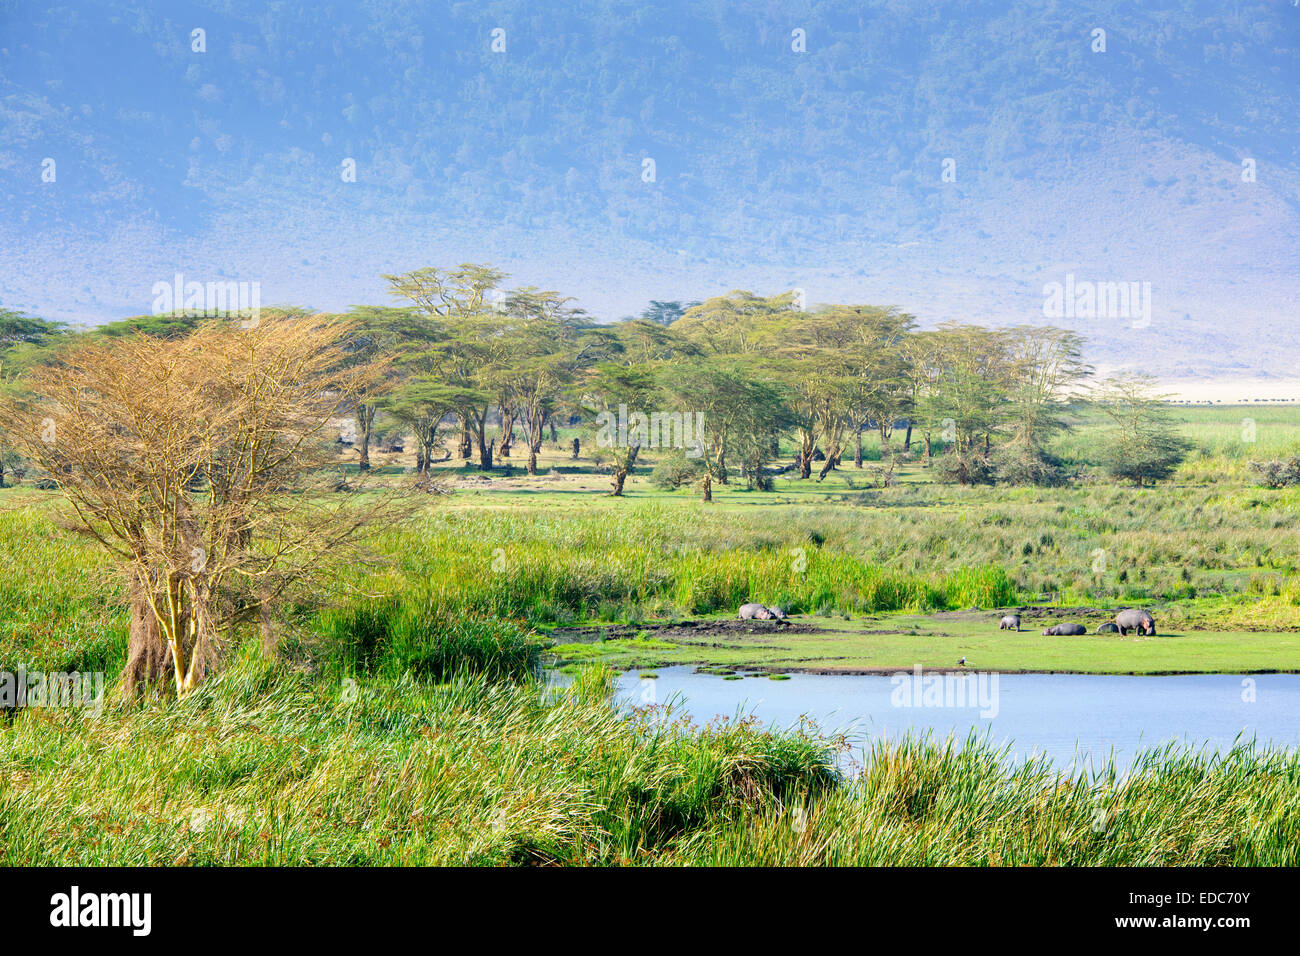 Landscape with lake, yellow-bark acacia (Acacia erubescens), reeds and a group of  Hippo (Hippopotamus amphibius) resting on the Stock Photo